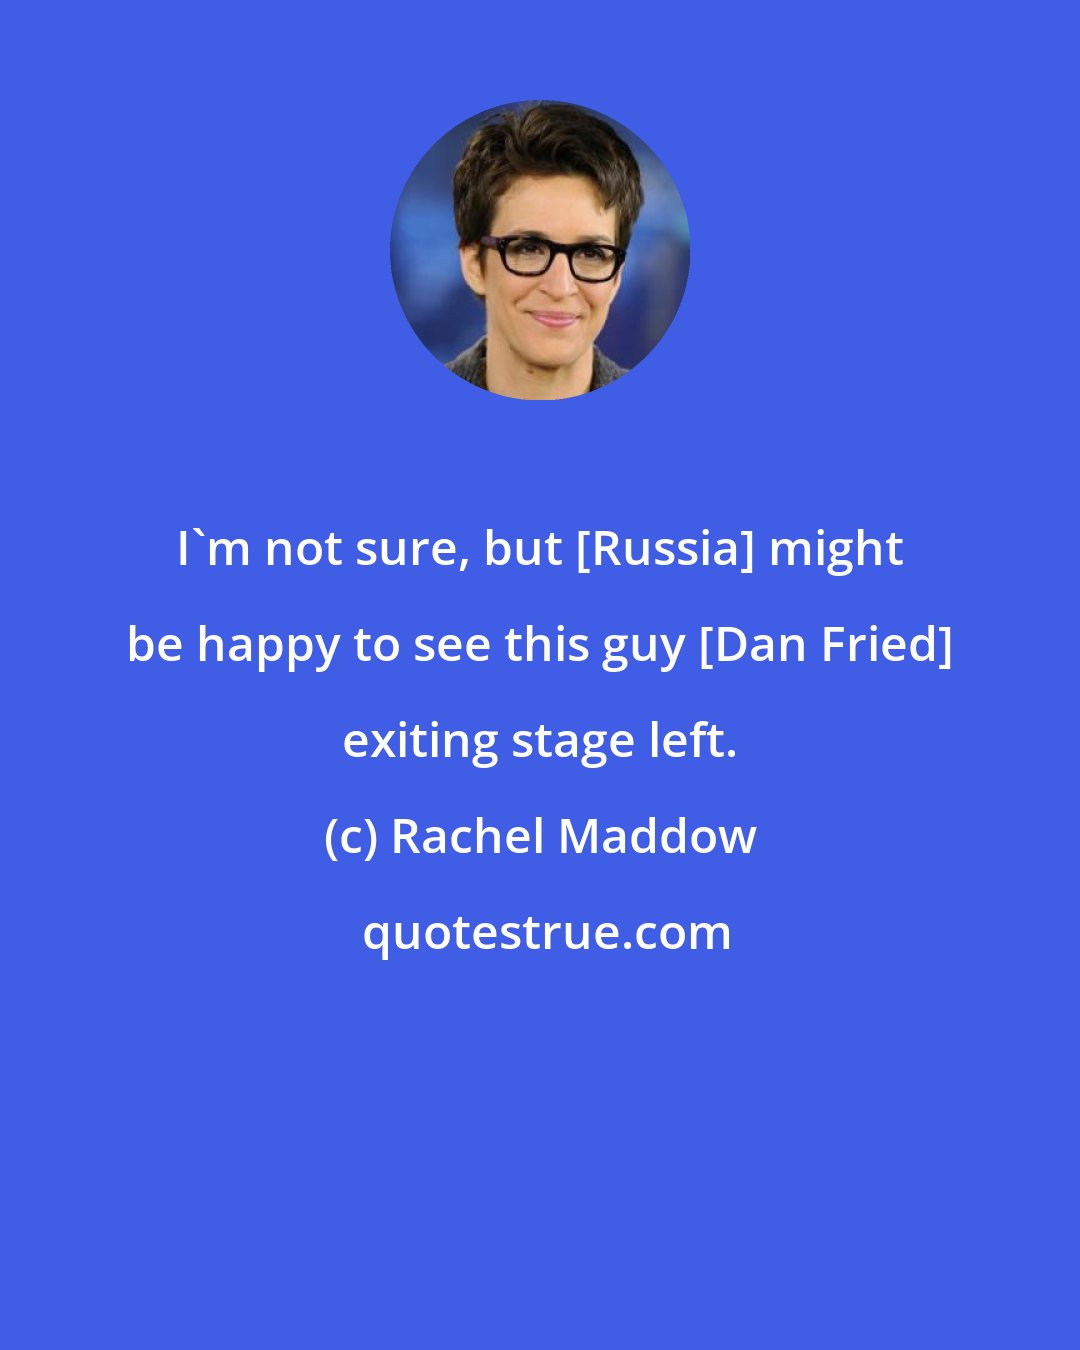 Rachel Maddow: I`m not sure, but [Russia] might be happy to see this guy [Dan Fried] exiting stage left.